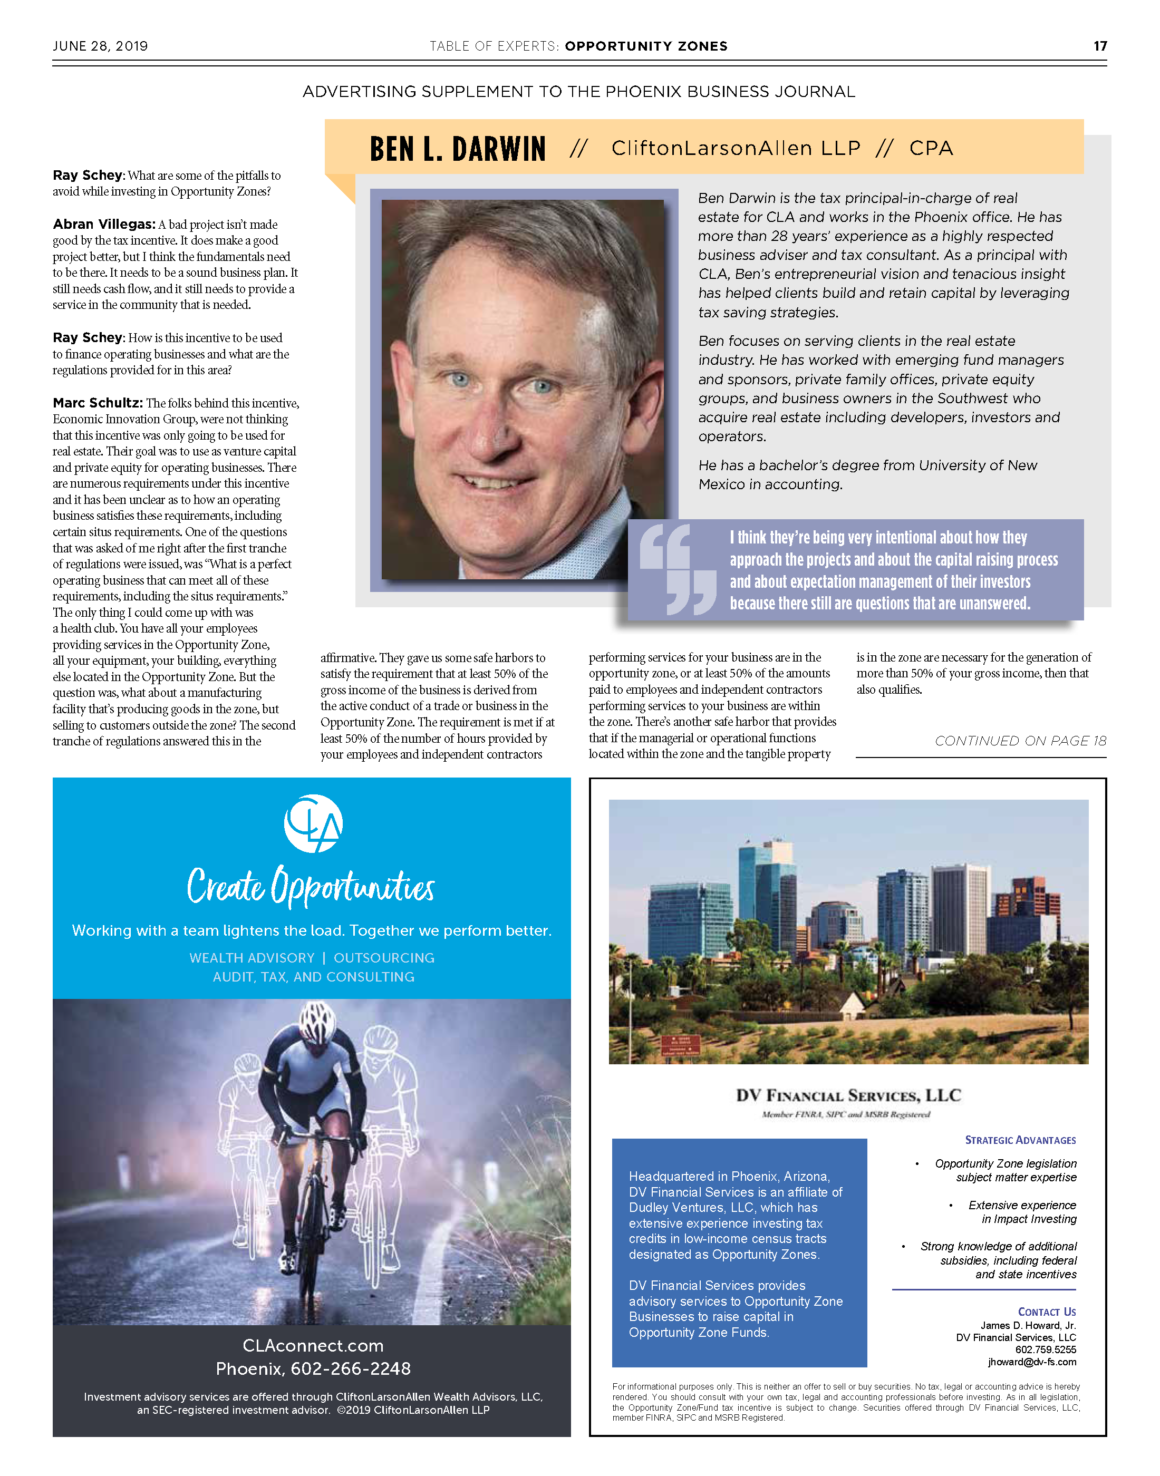 Advertising supplement to the June 2019 edition of Phoenix Business Journal — the 2019 Table of Experts discusses opportunity zone investing and its broader impact on the America's communities.